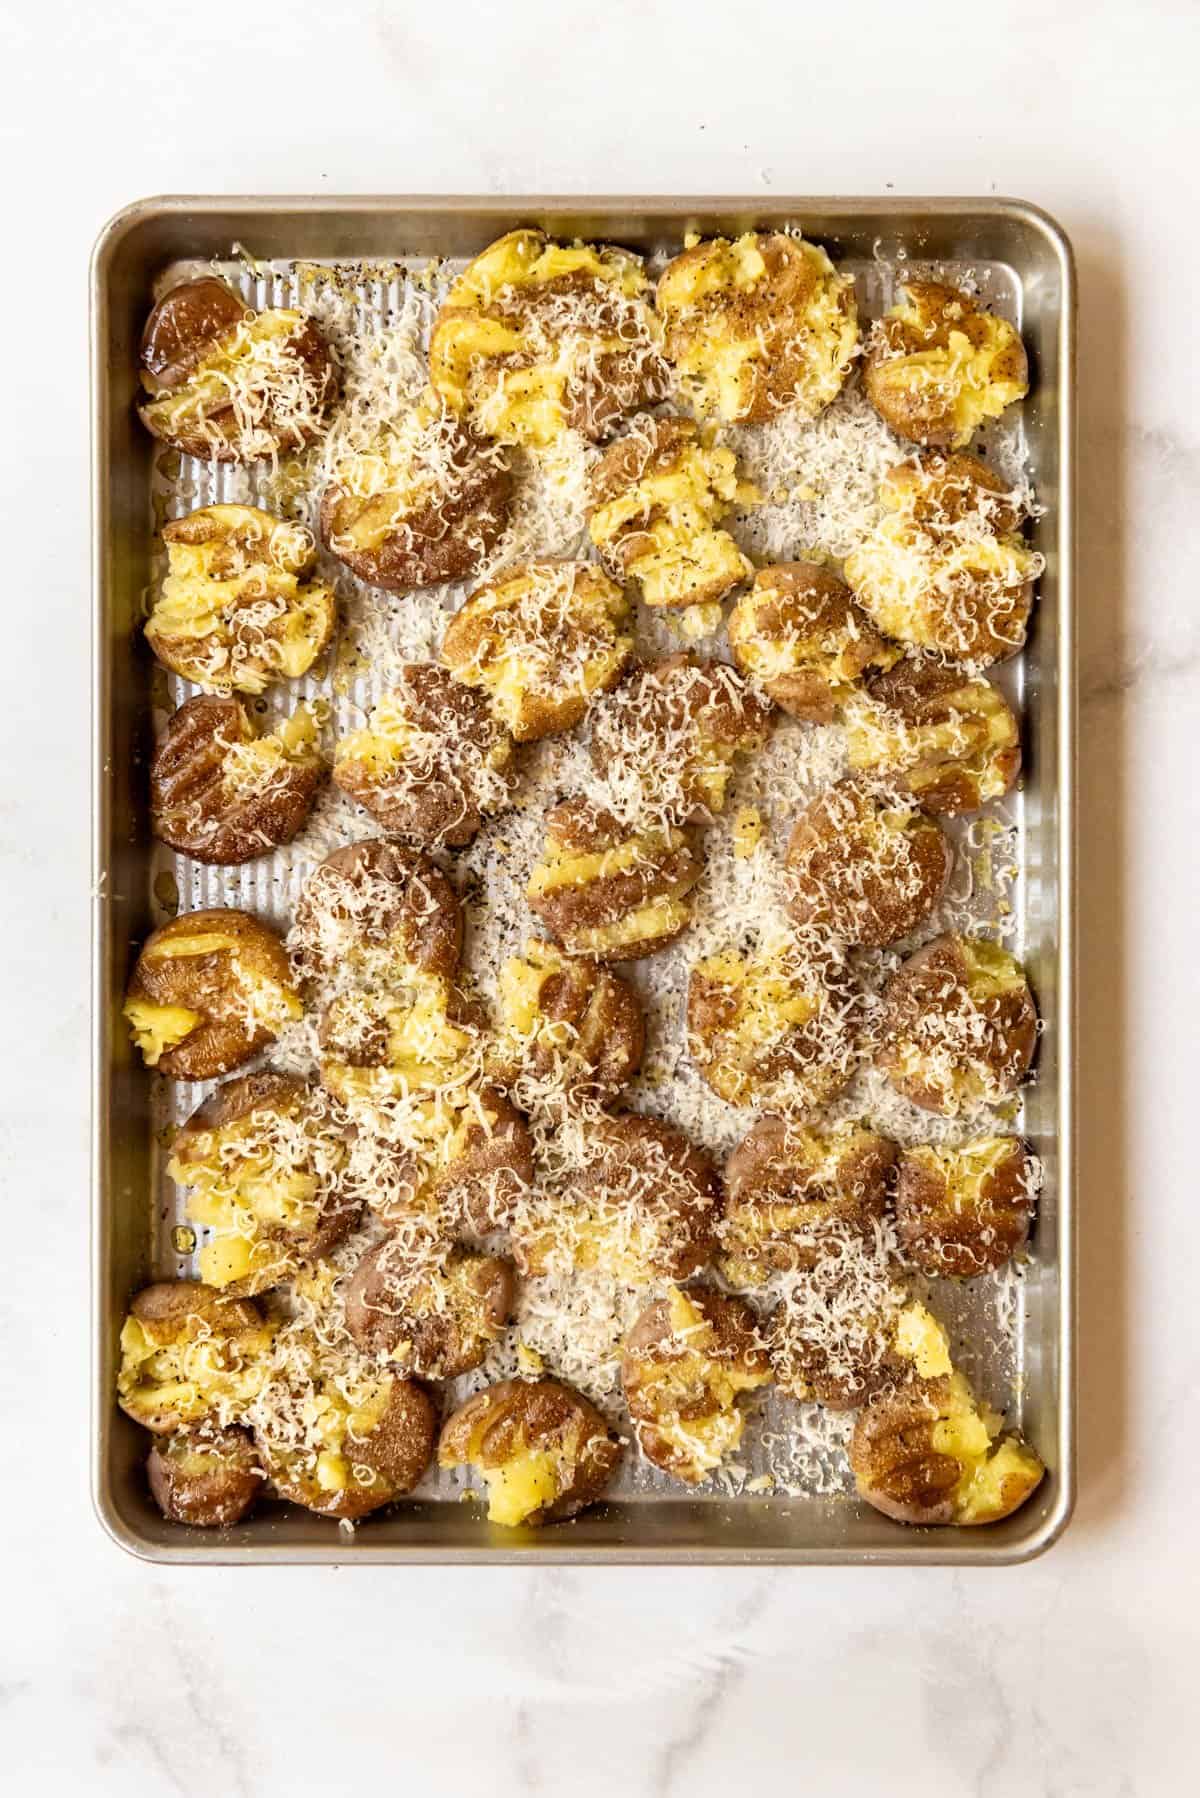 Parmesan cheese sprinkled over smashed potatoes on a baking sheet.